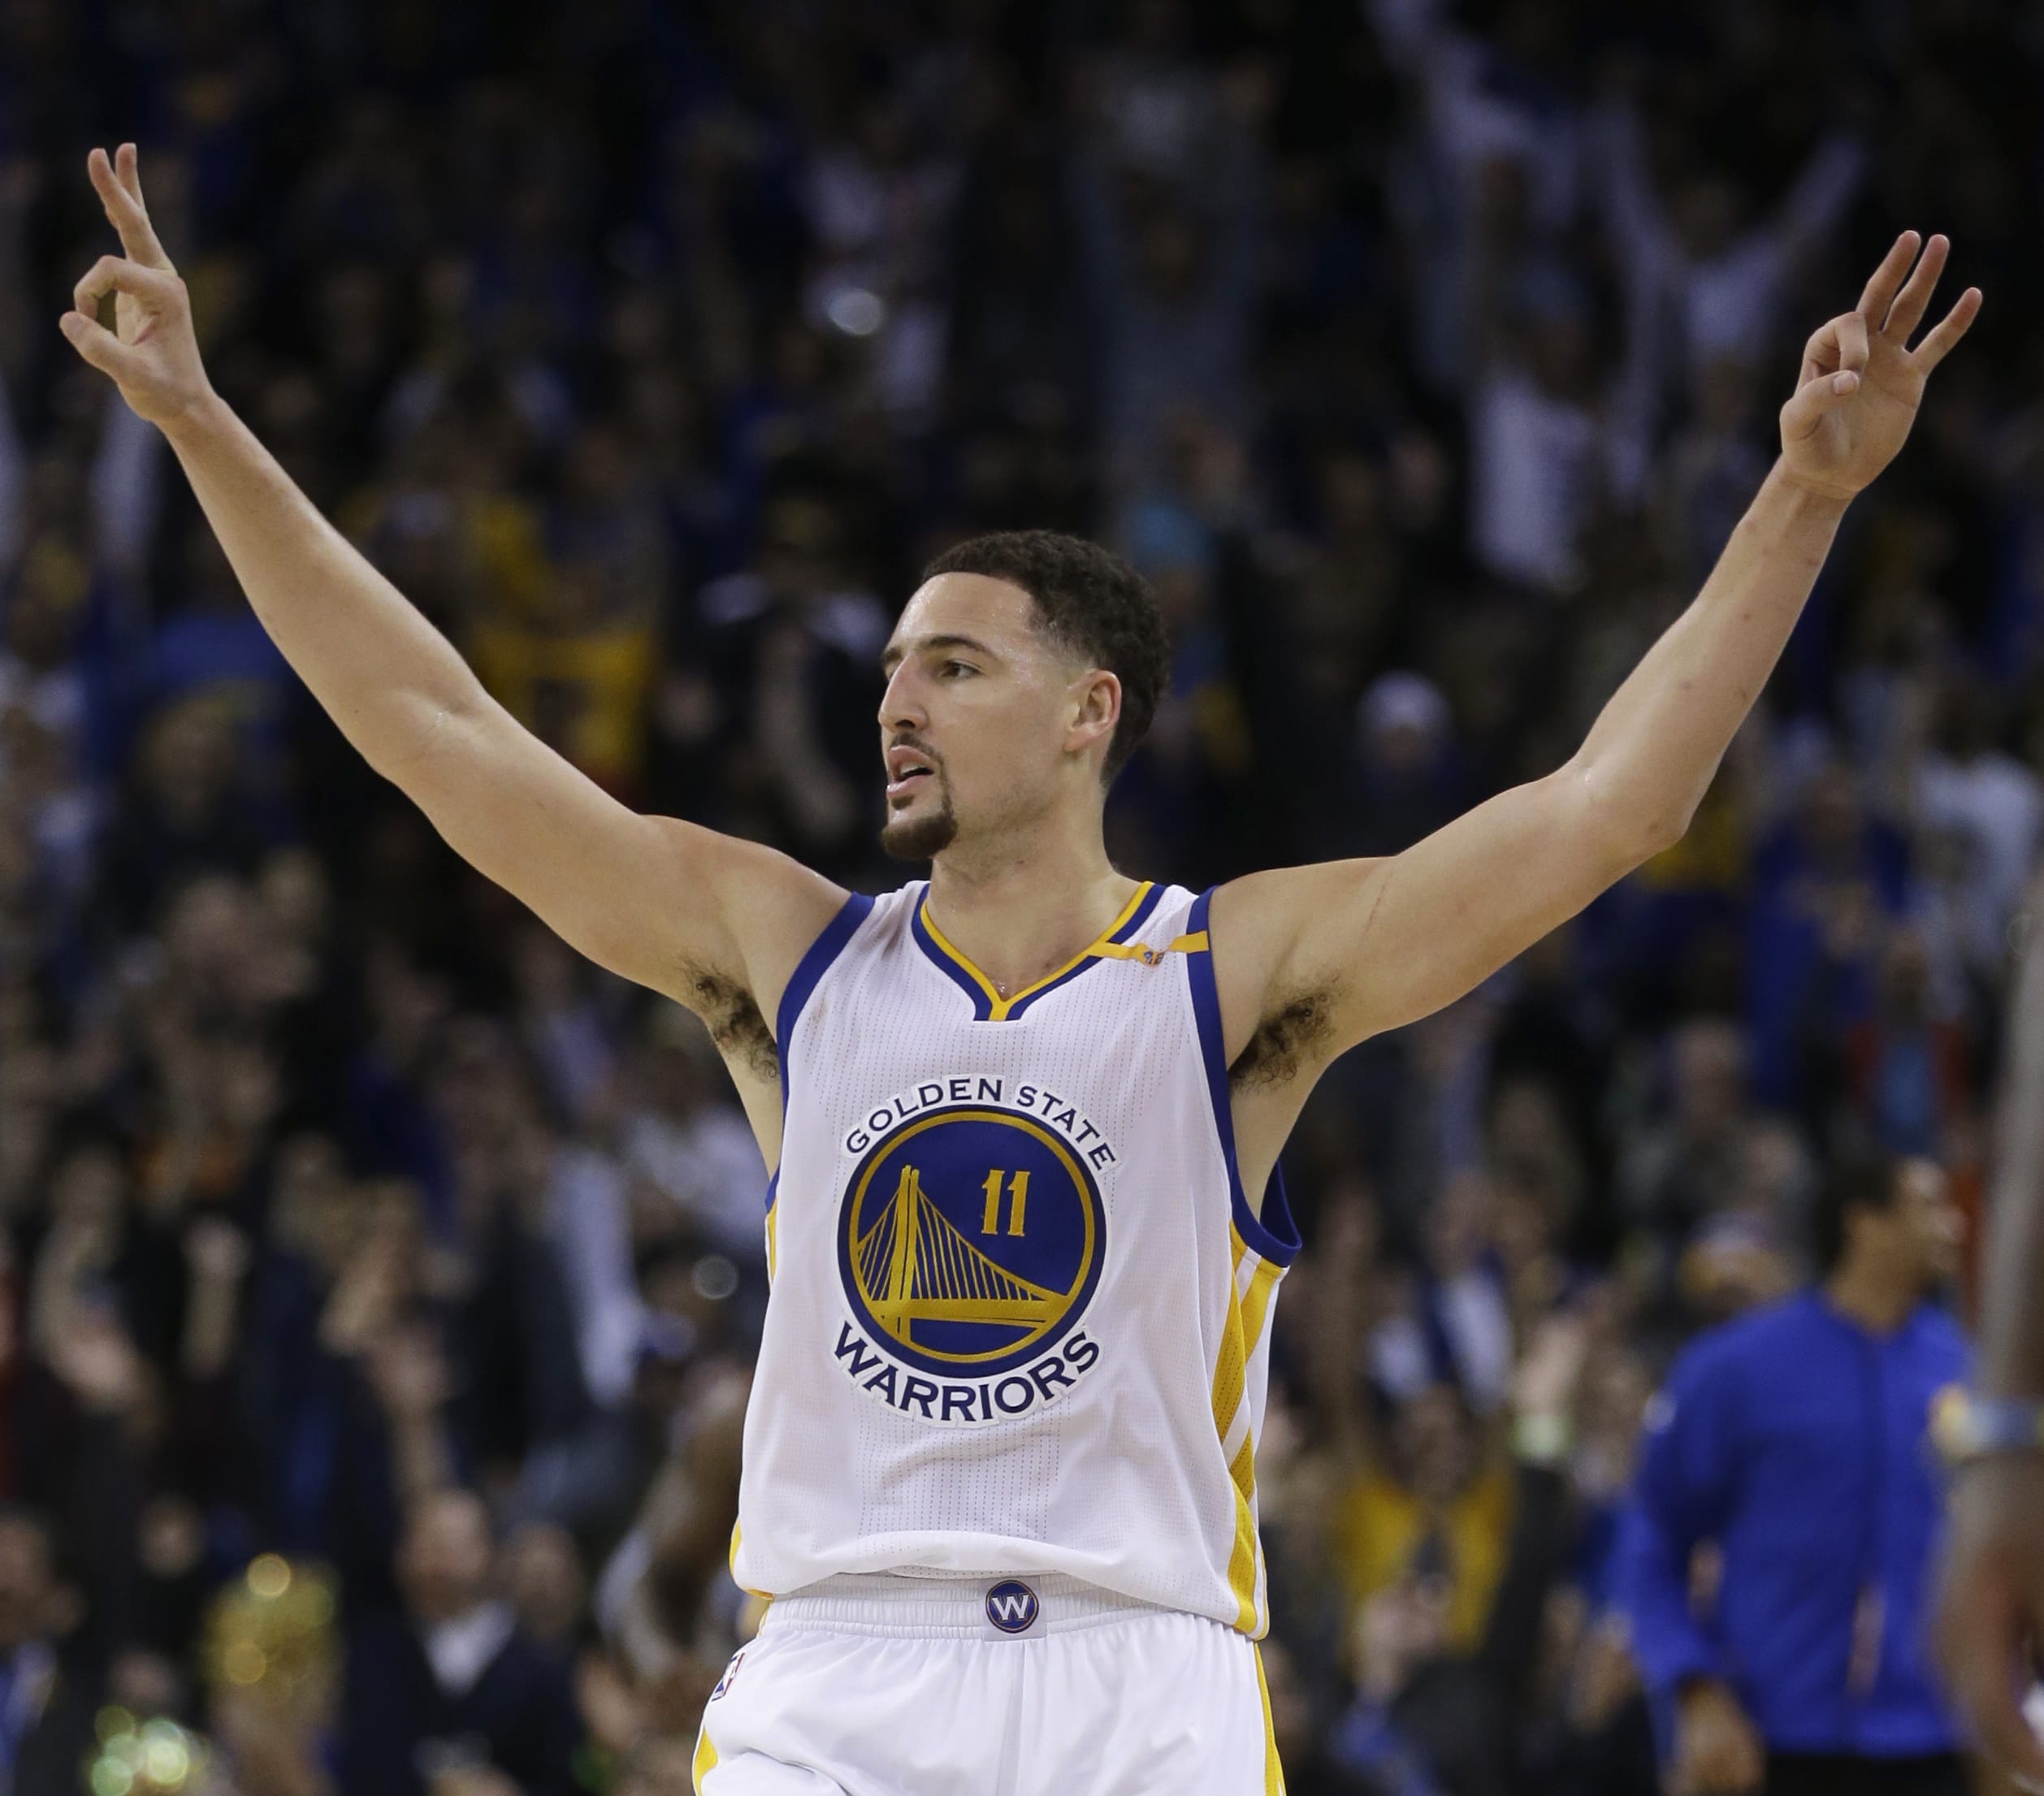 Golden State Warriors' Klay Thompson celebrates a score during the third quarter of an NBA basketball game against the Indiana Pacers Monday, Dec. 5, 2016, in Oakland, Calif.